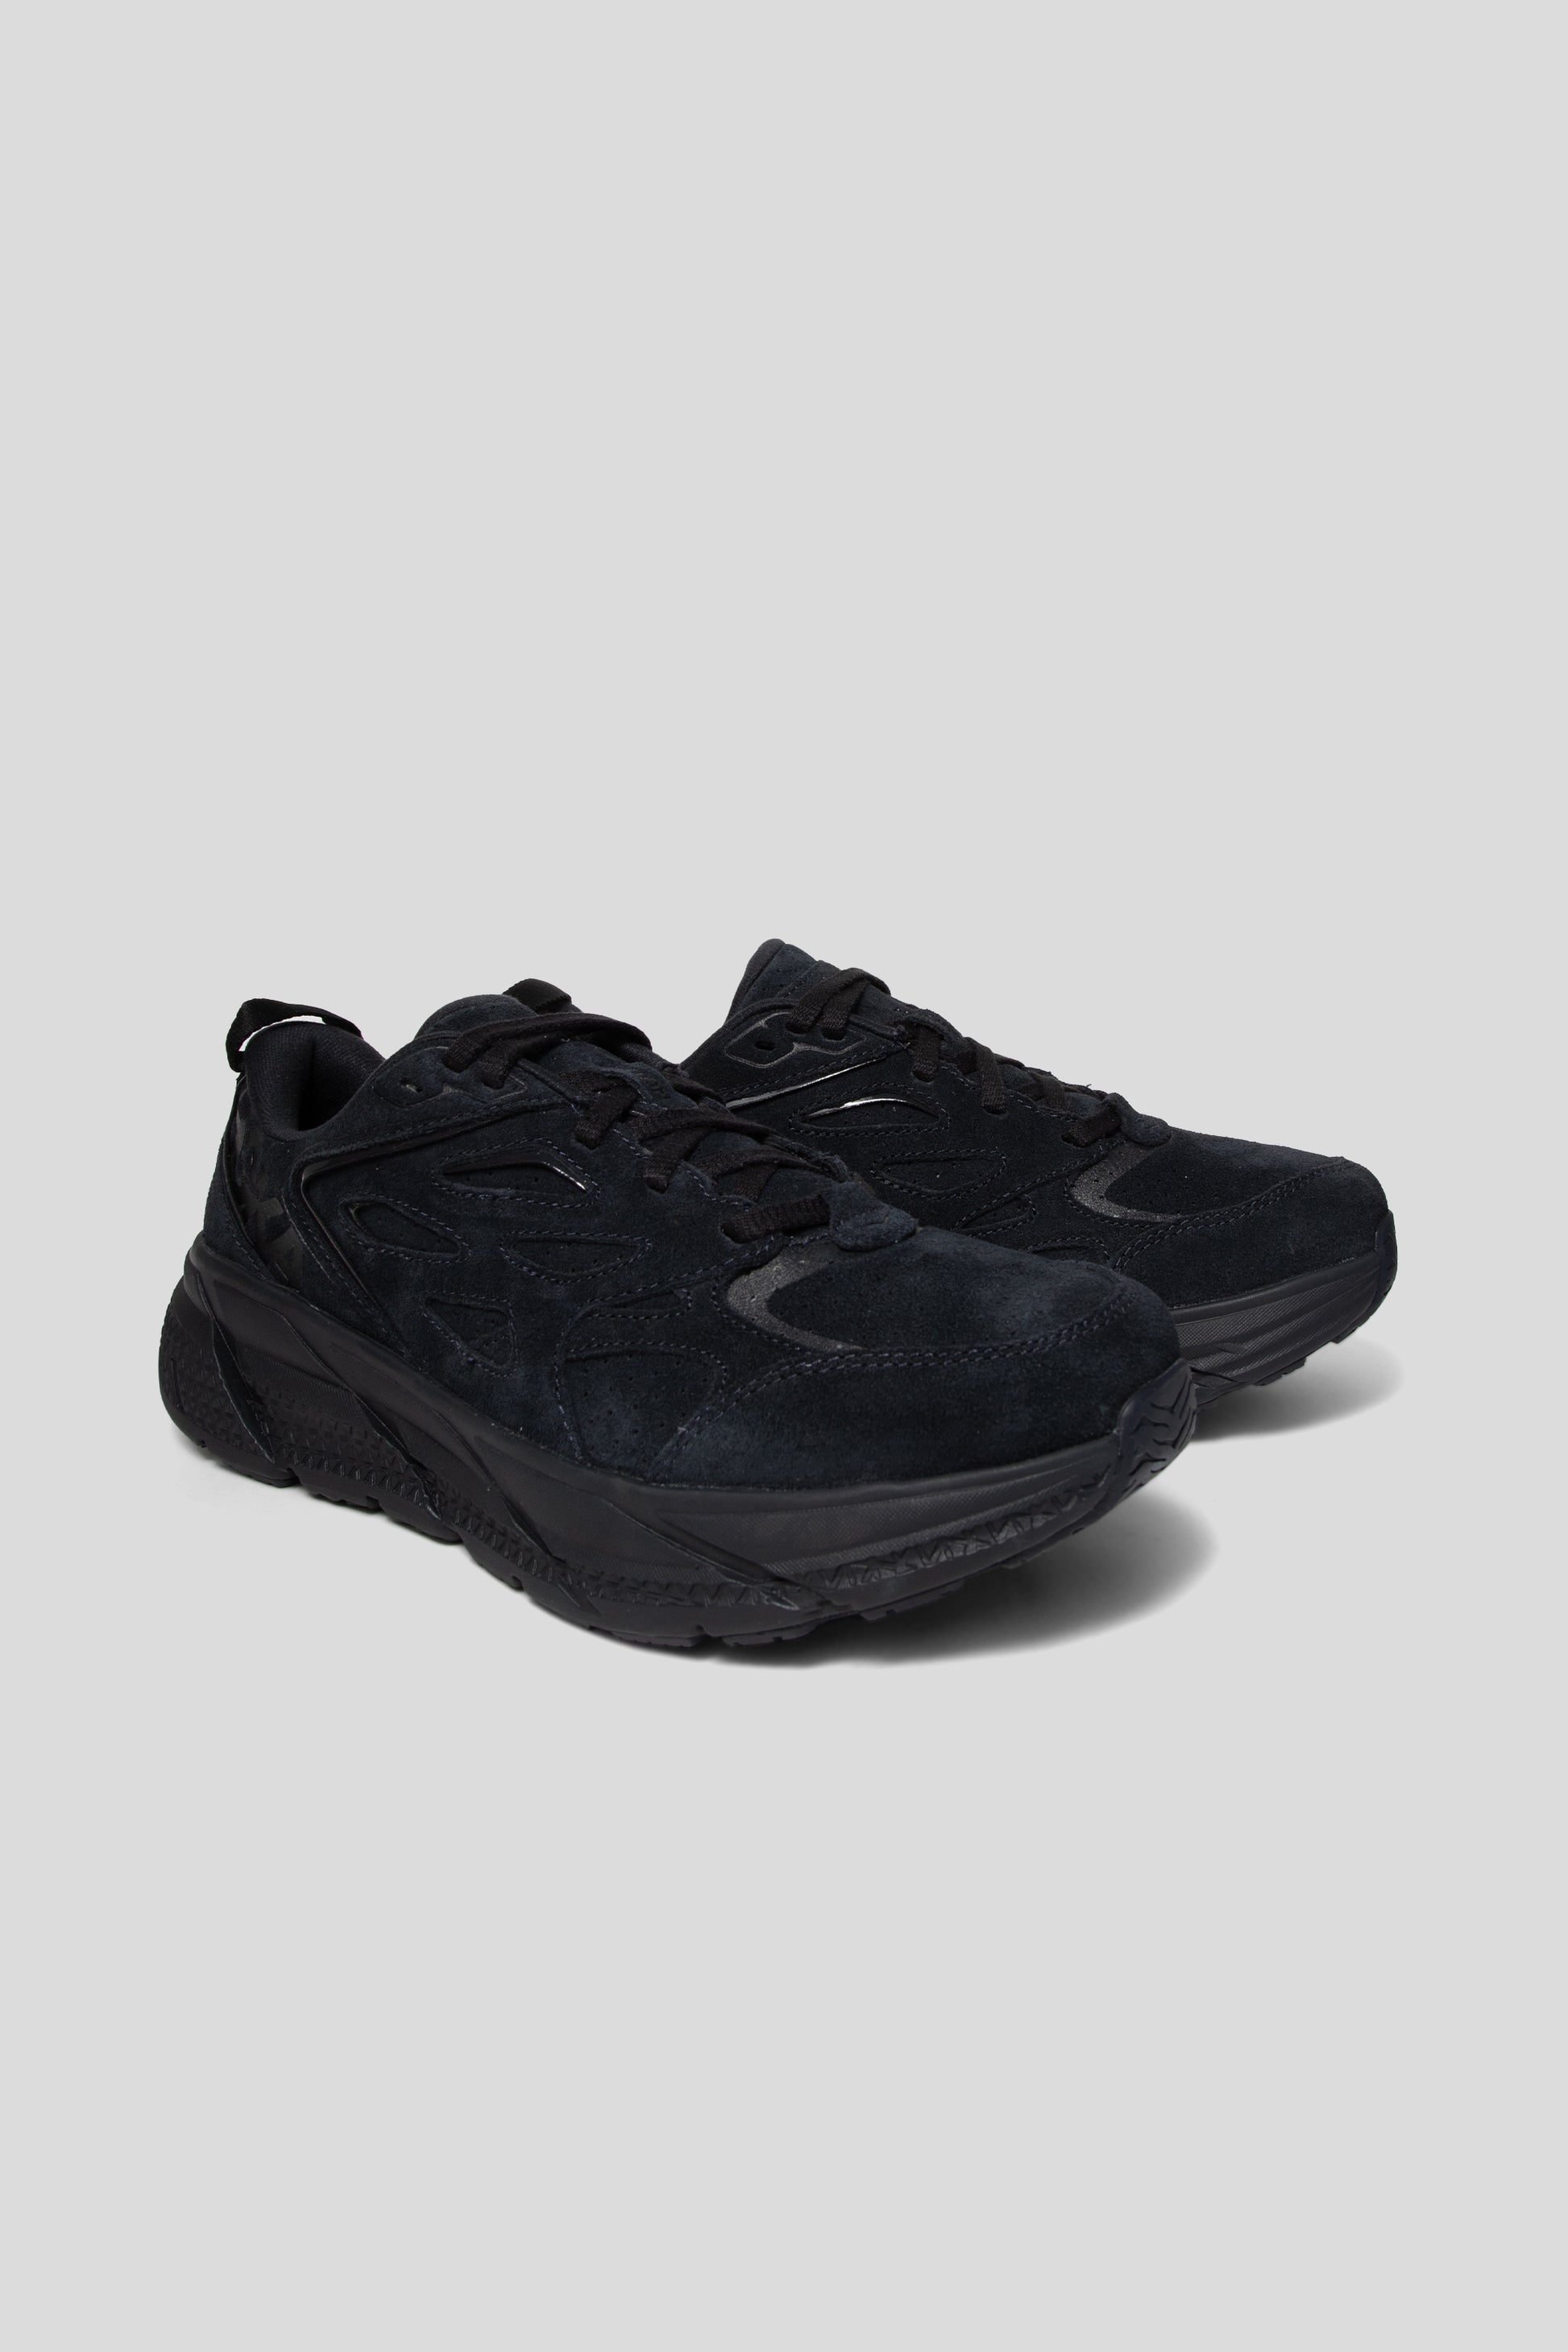 Hoka All Gender Clifton L Suede Shoe in Black